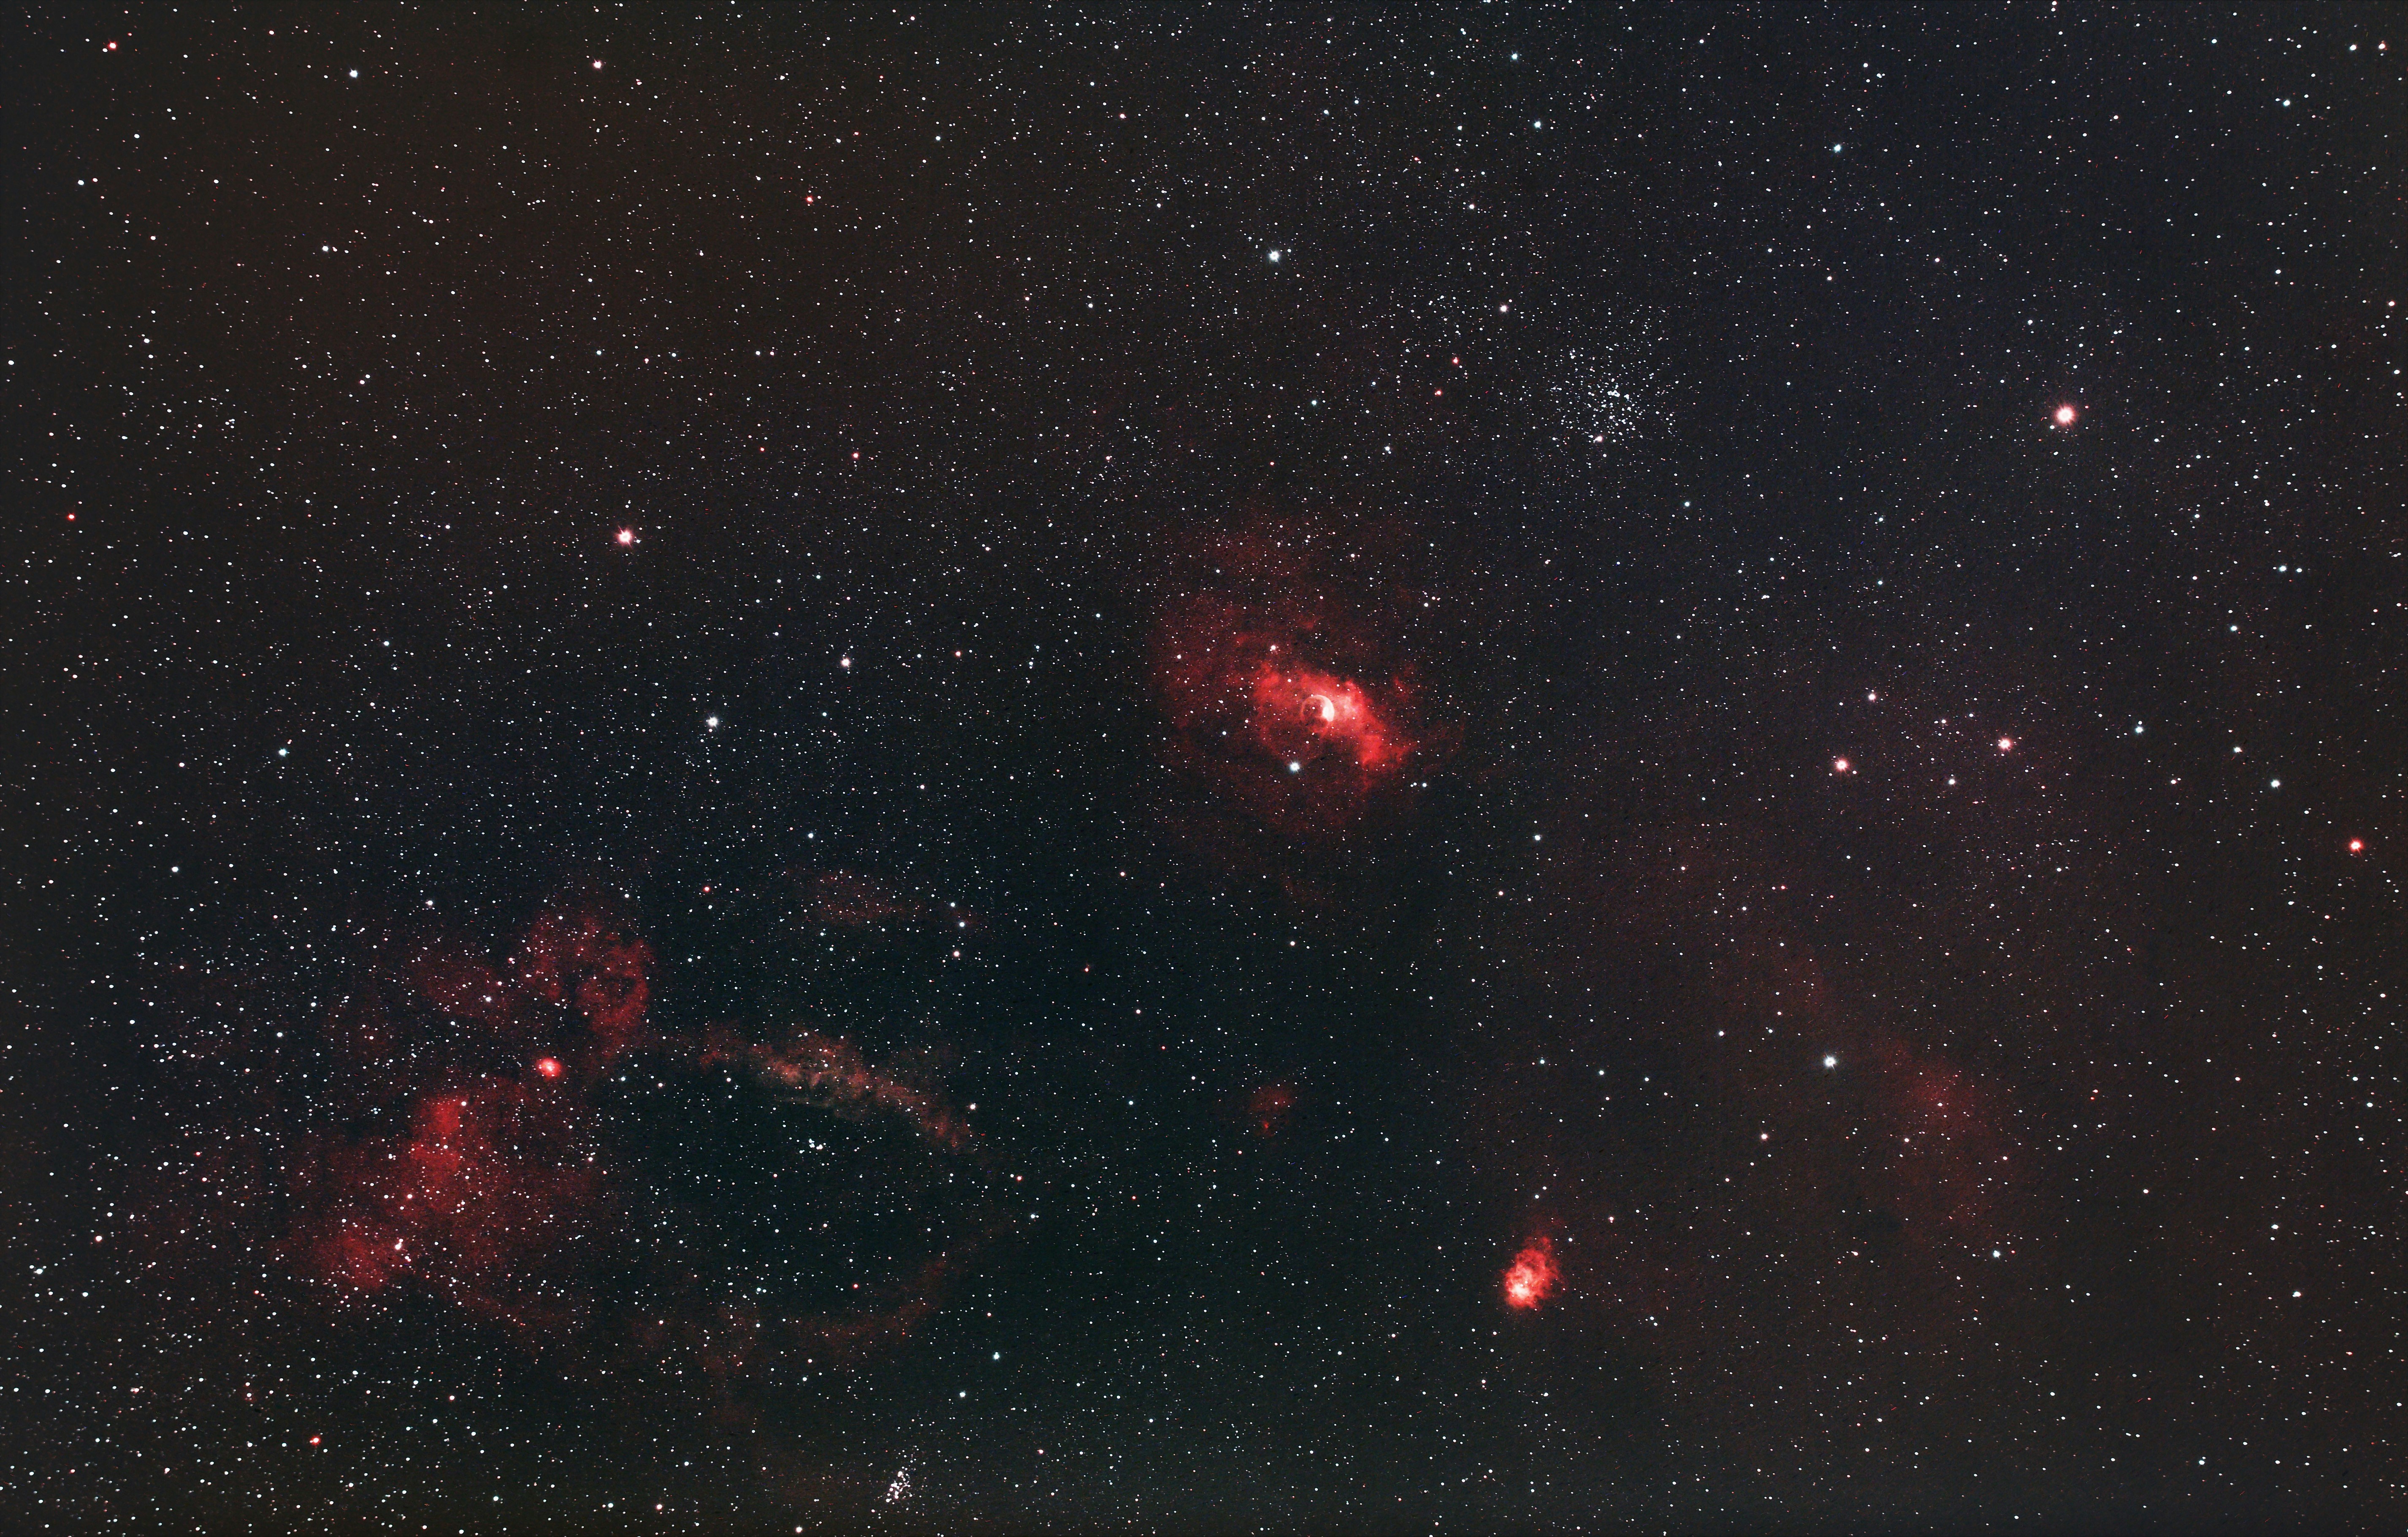 Bubble Nebula region w/ open cluster M52 and Lobster's Claws (zoom in to see Bubble)